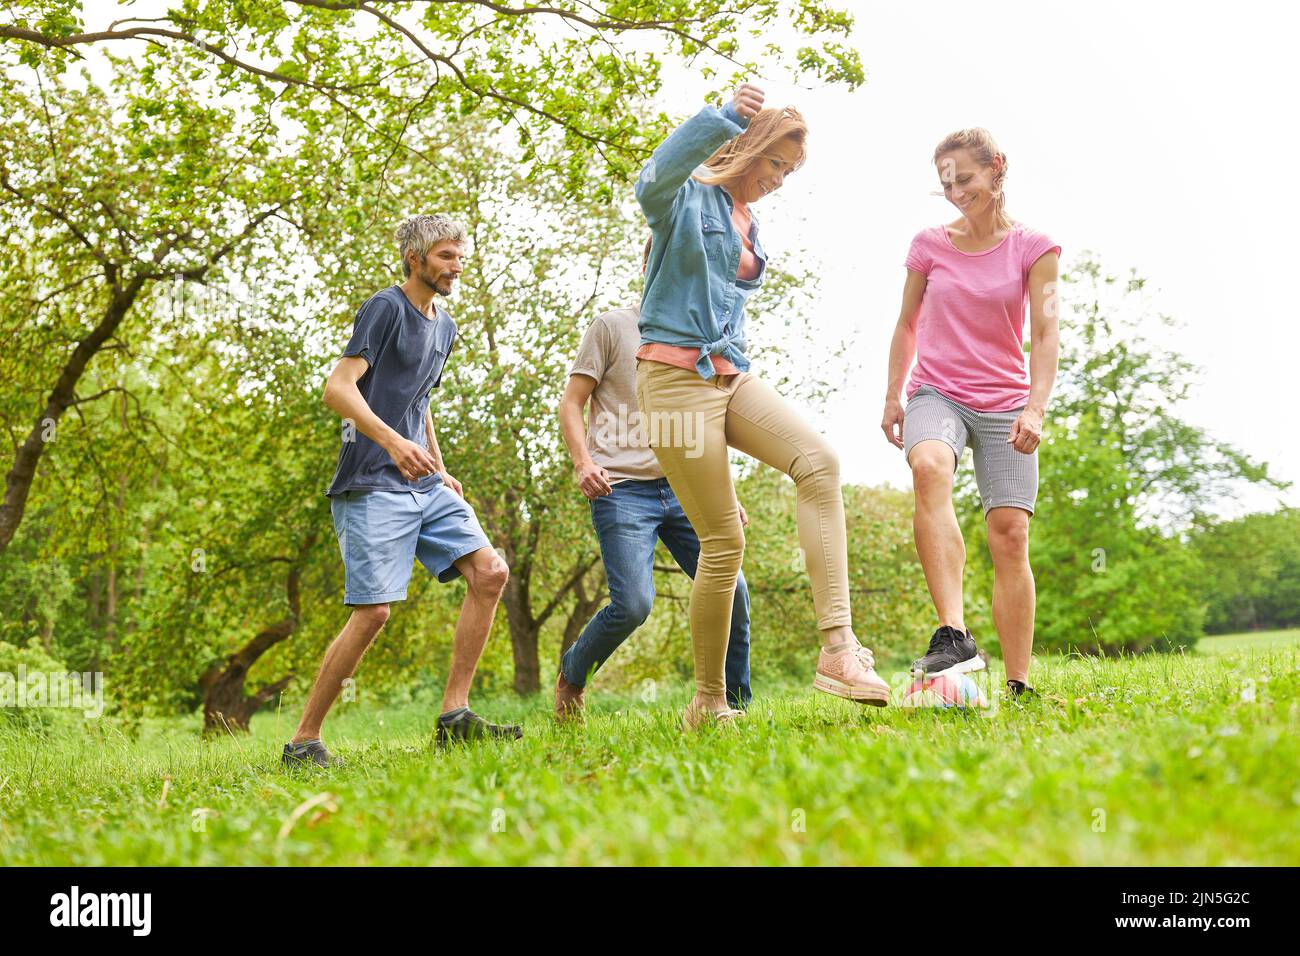 Young people have fun together playing soccer in a meadow in summer Stock Photo